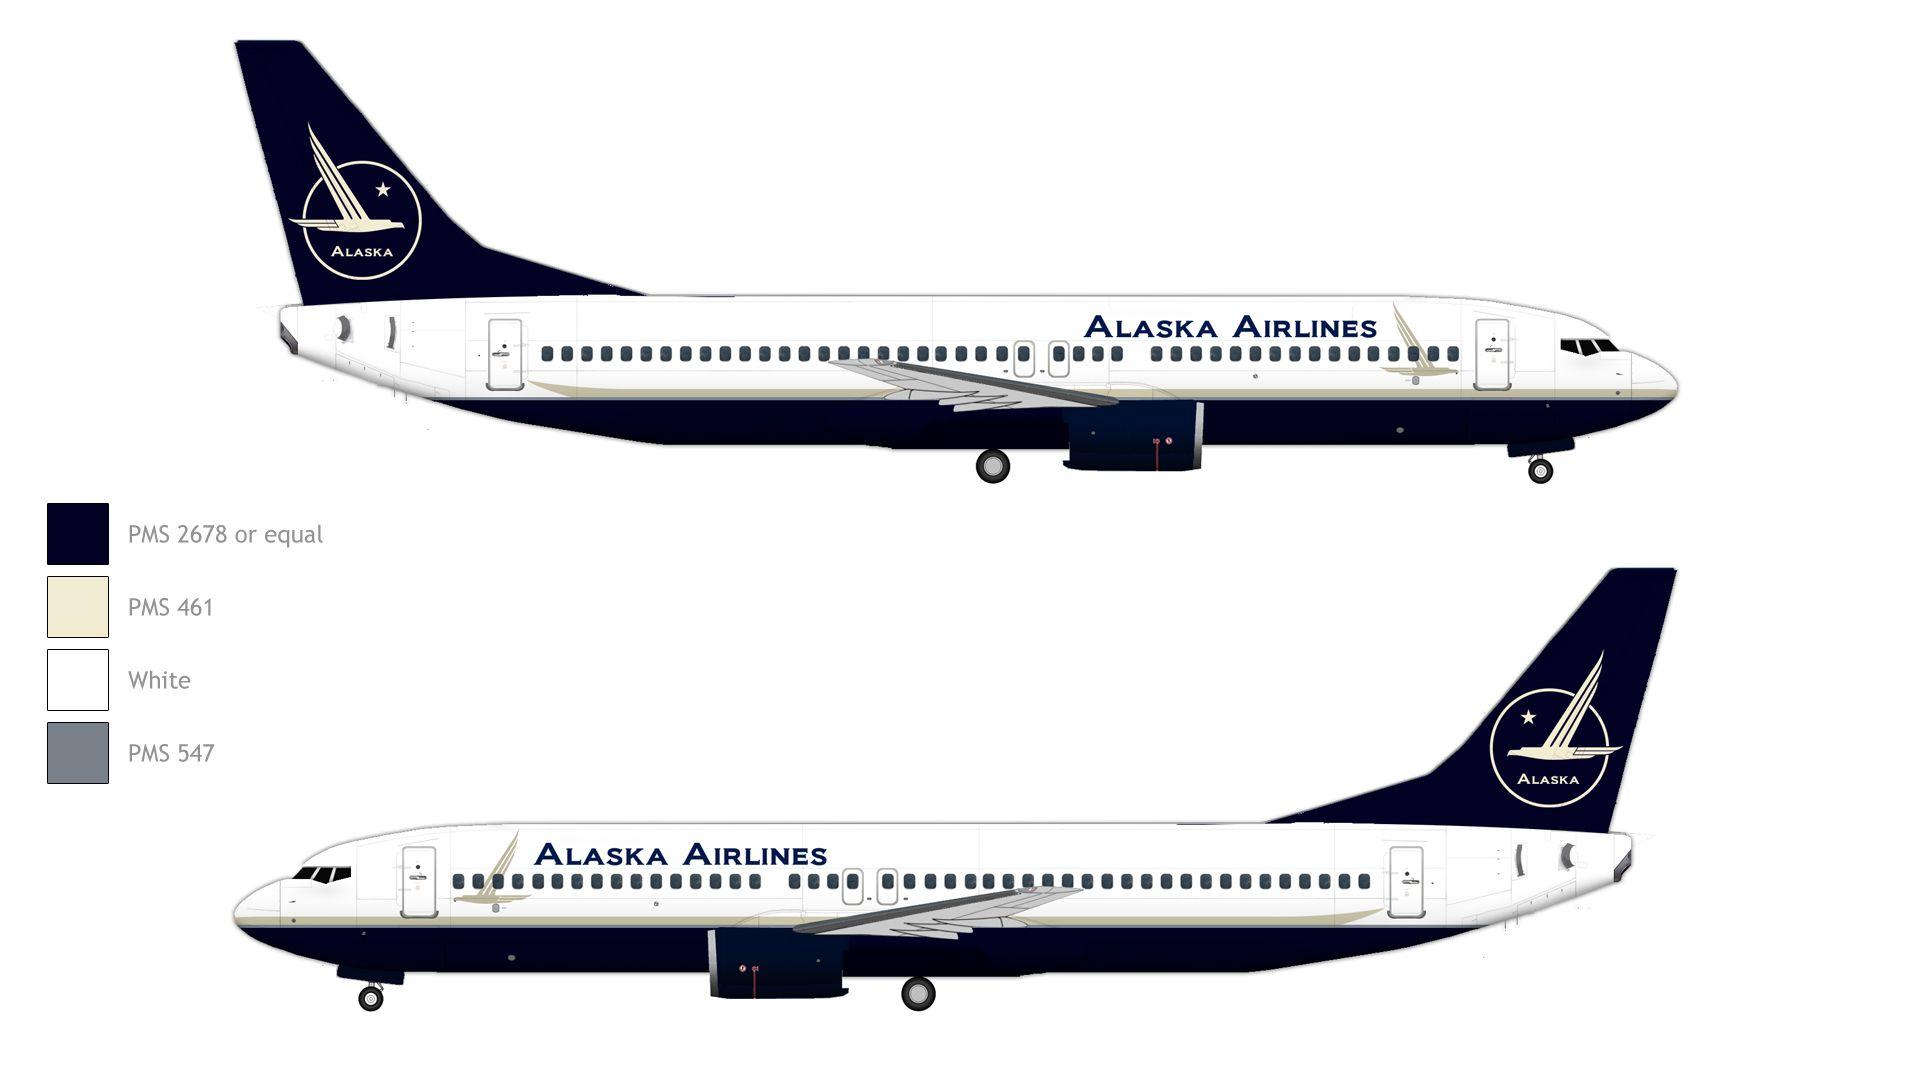 Airline Liveries and Logo - A sleek & classy alternate livery for Alaska Airlines : aviation